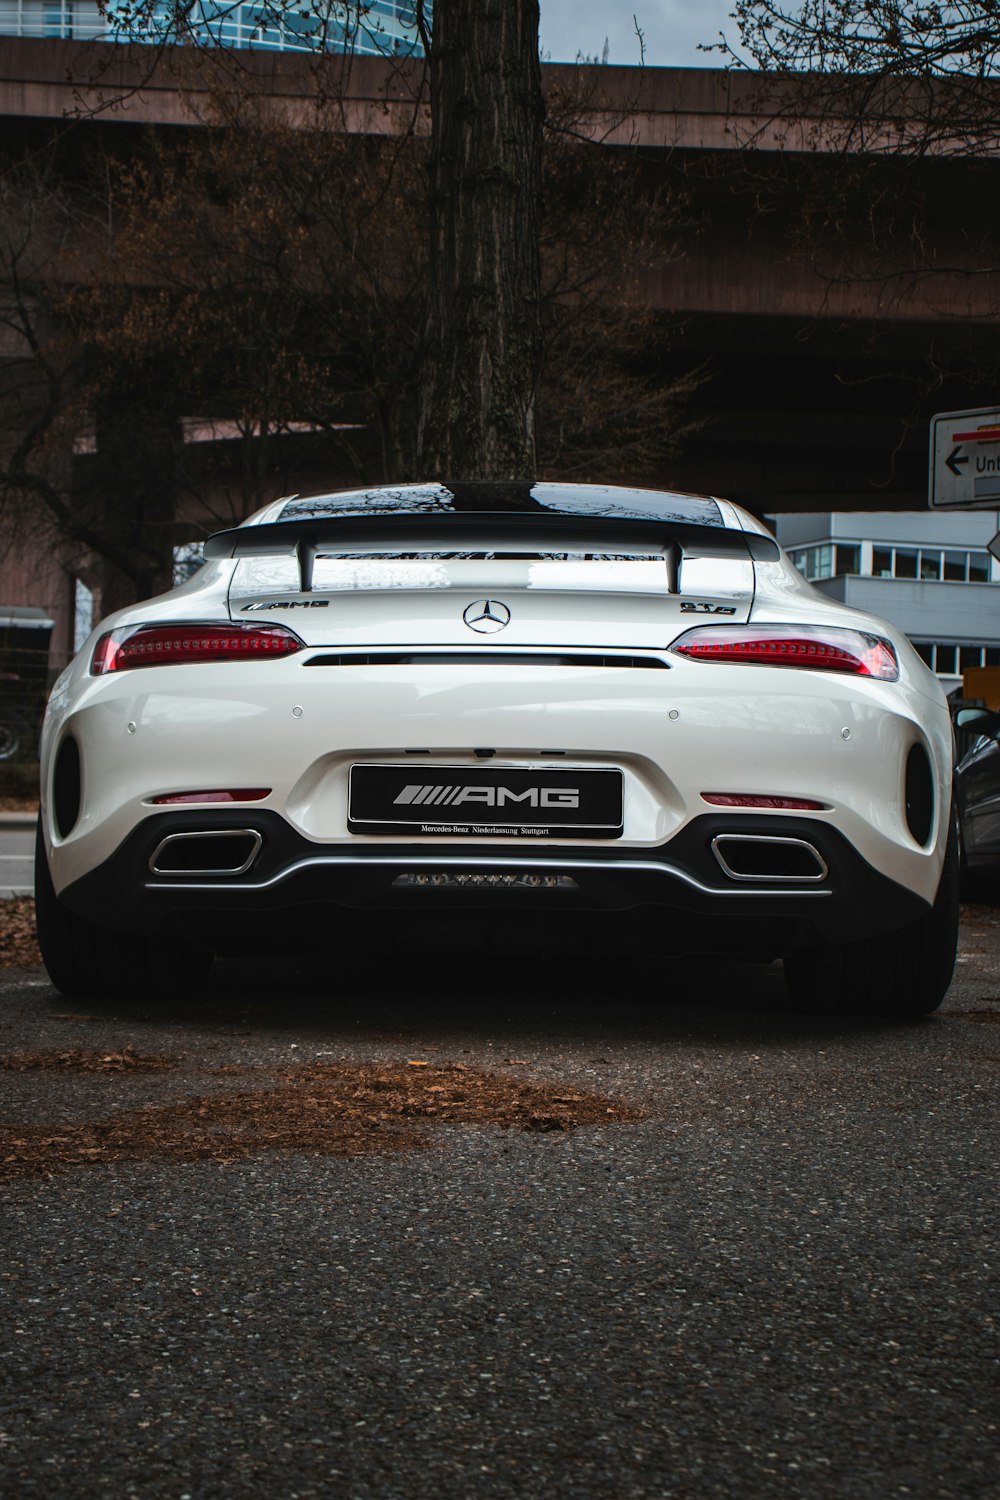 Amg Gt Pictures [HD] | Download Free